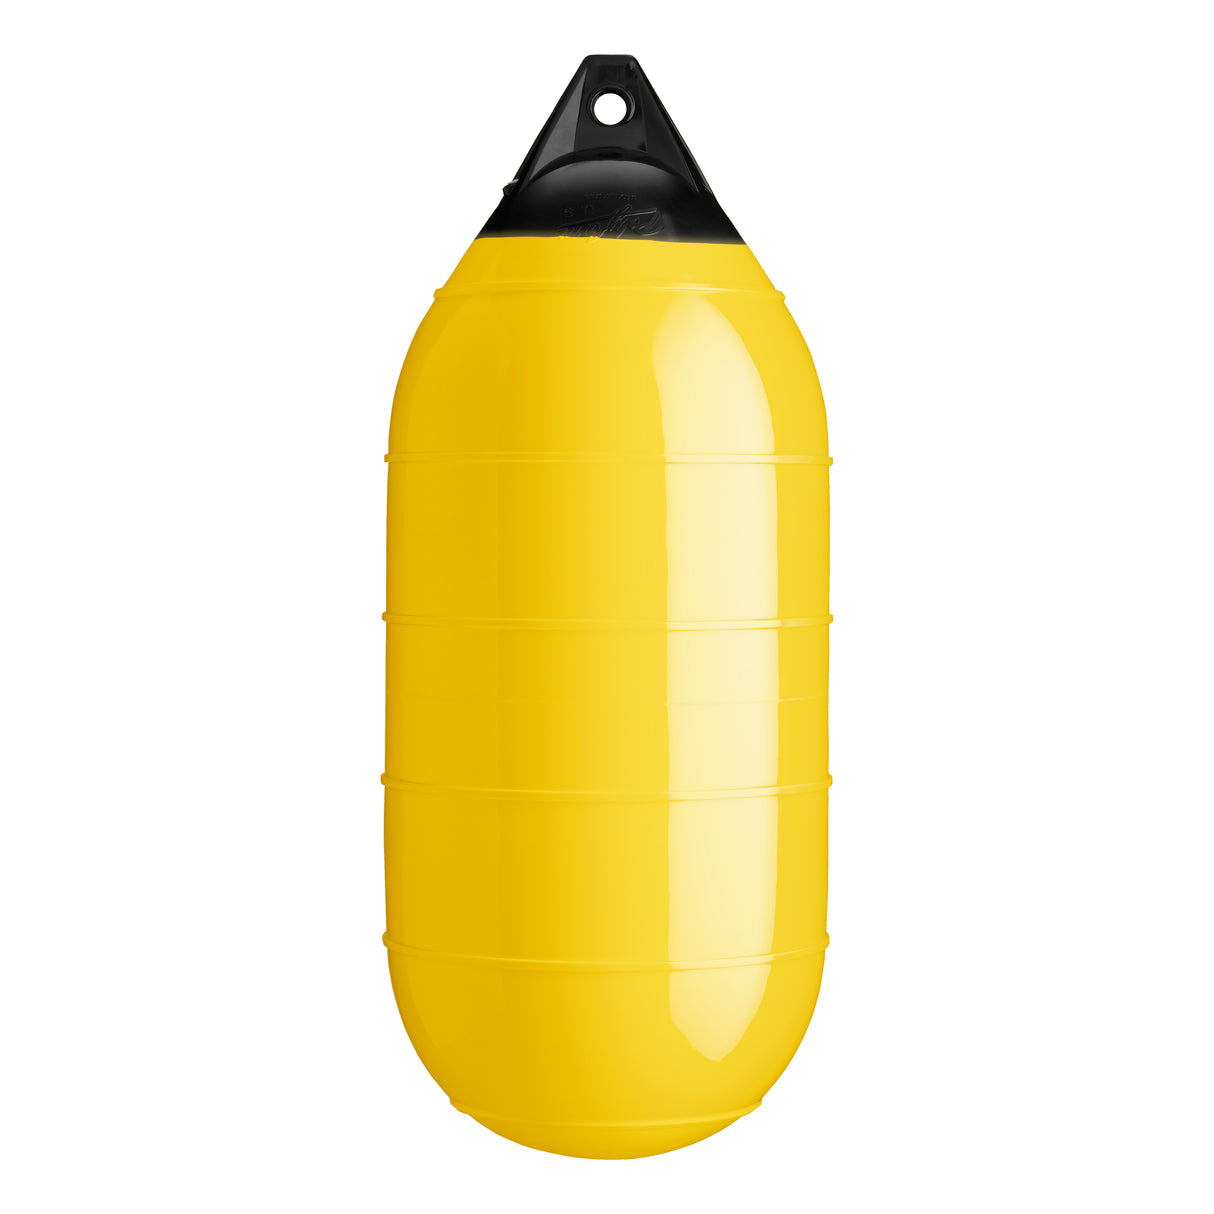 Yellow low drag buoy with Black-Top, Polyform LD-4 